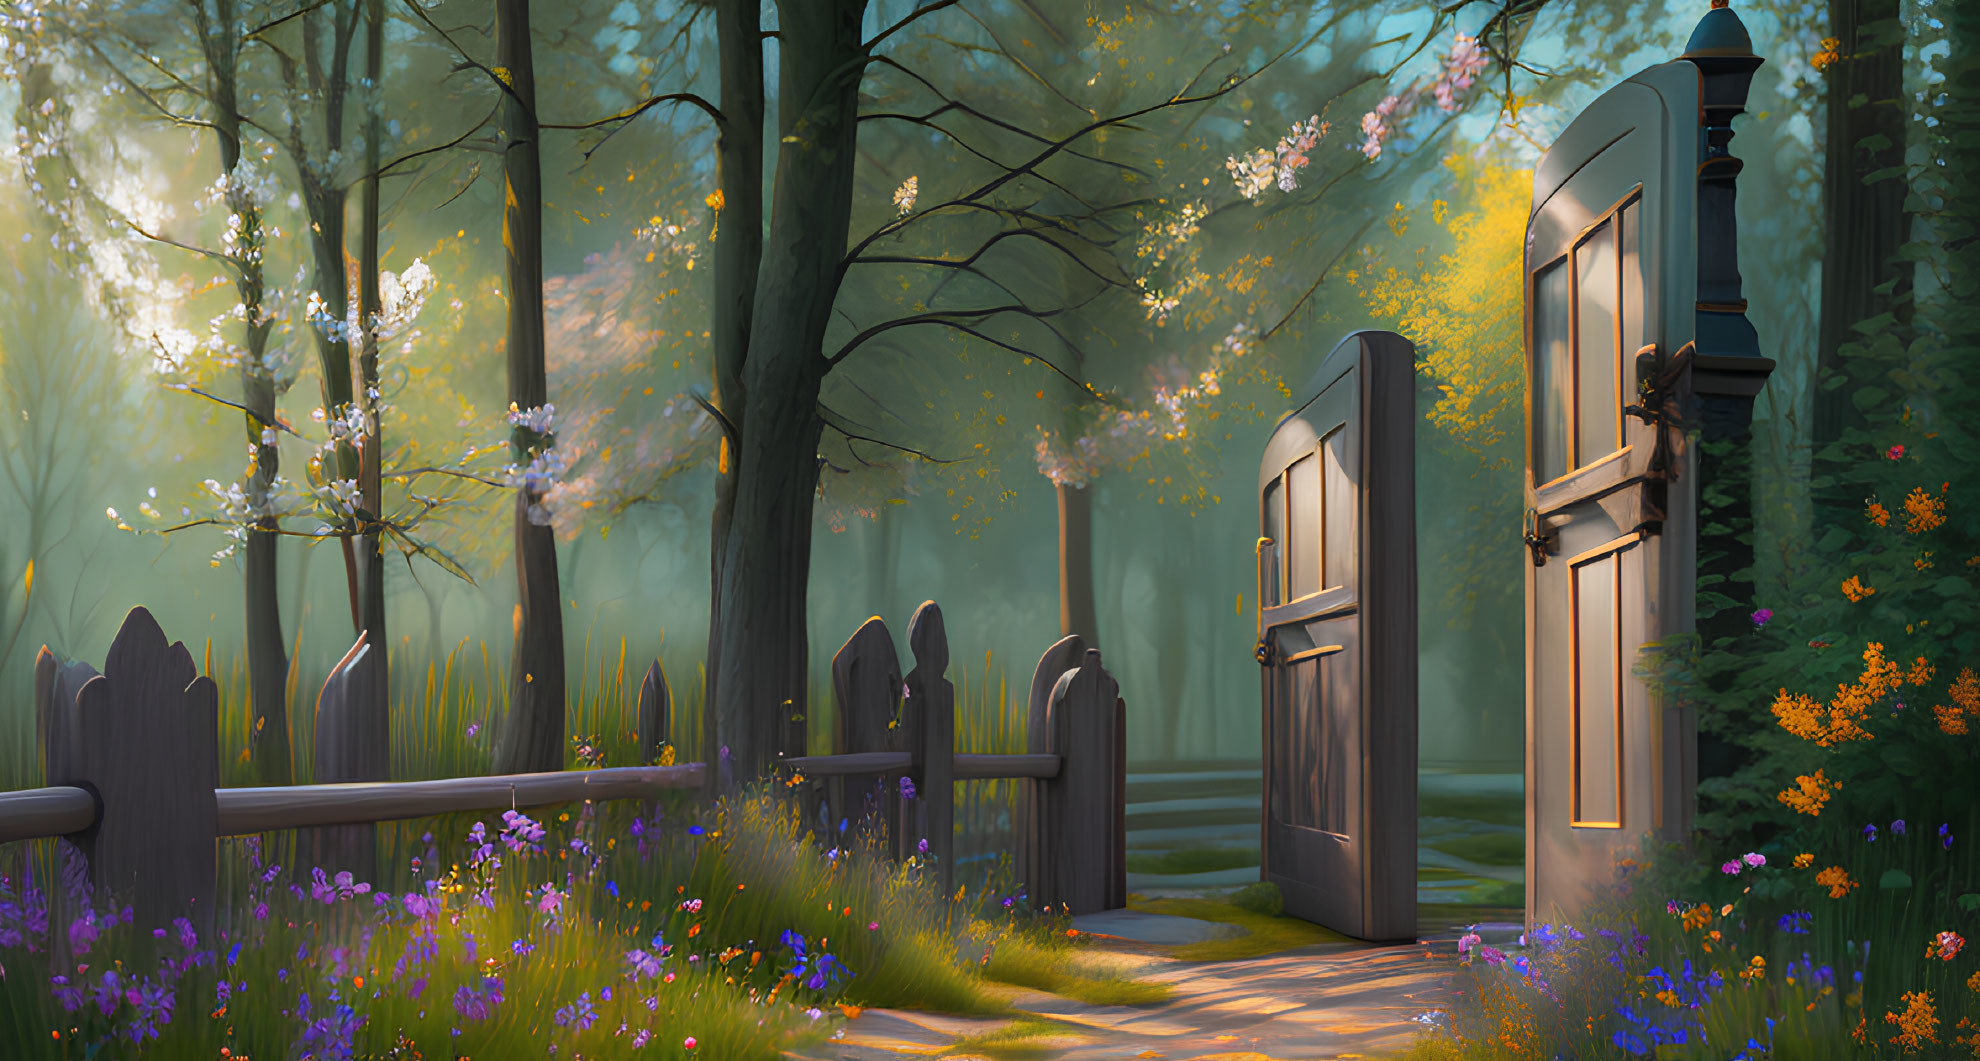 Enchanted forest scene with vintage door, blooming flowers, and sunlight